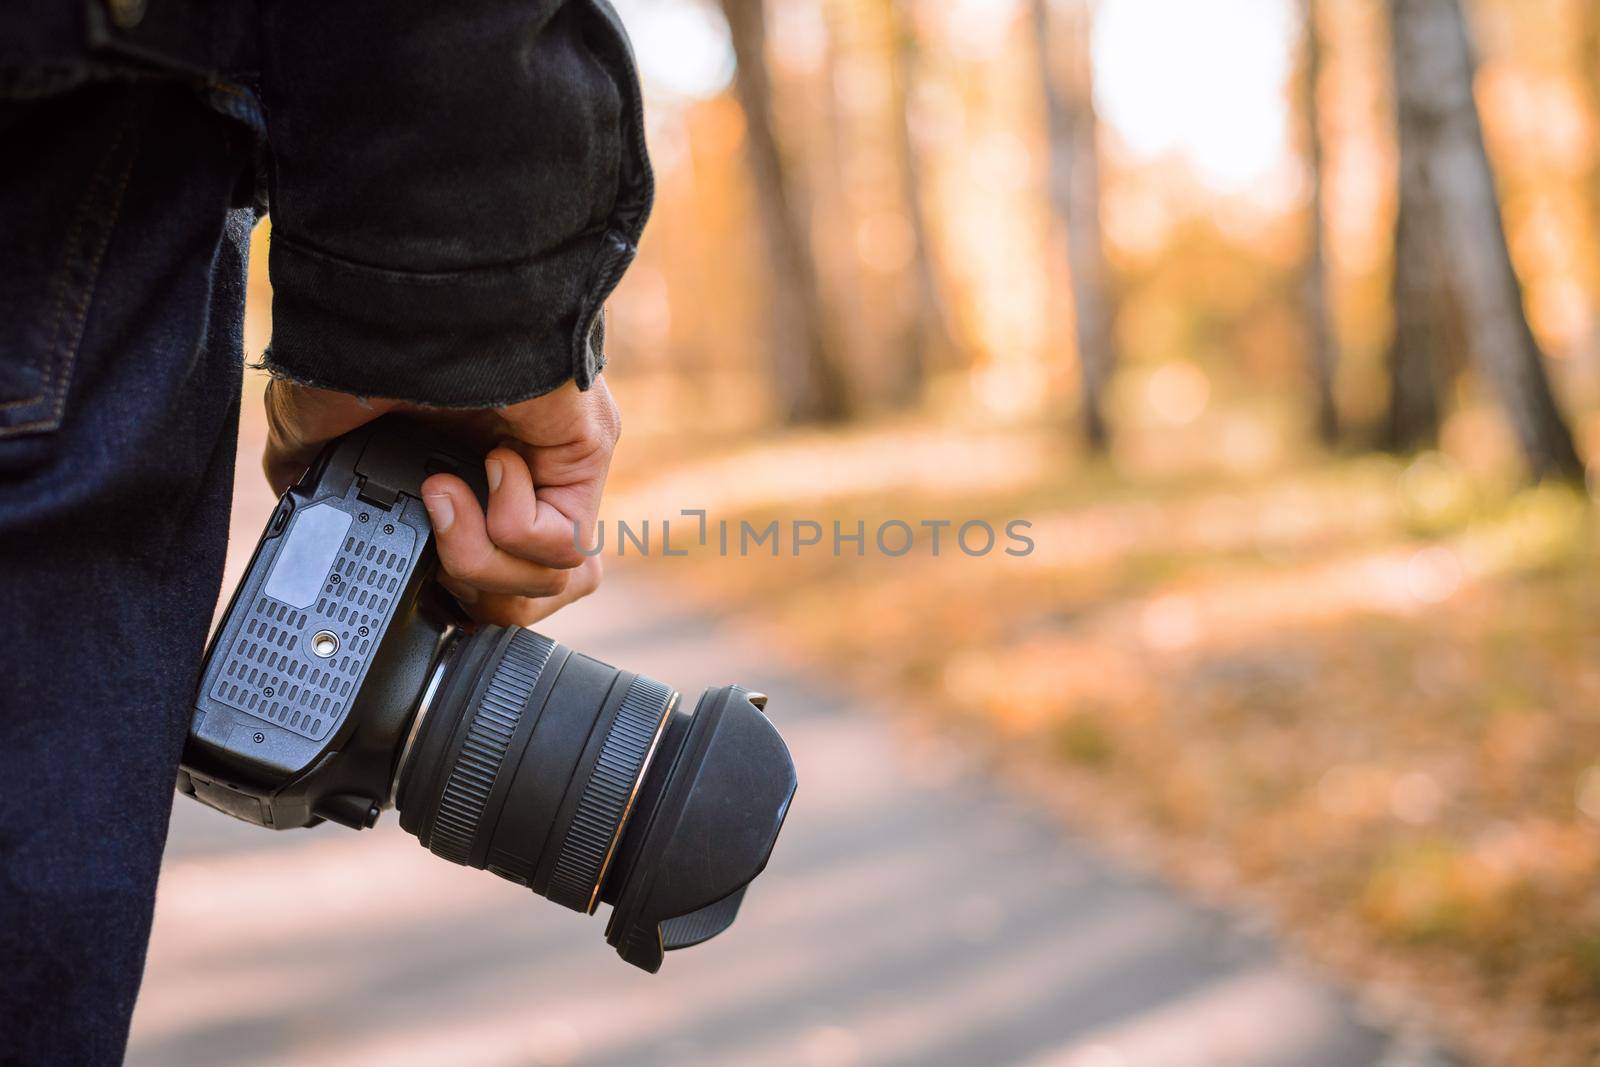 Nature photographer with digital camera going to shoot some landscapes in autumn forest in the evening